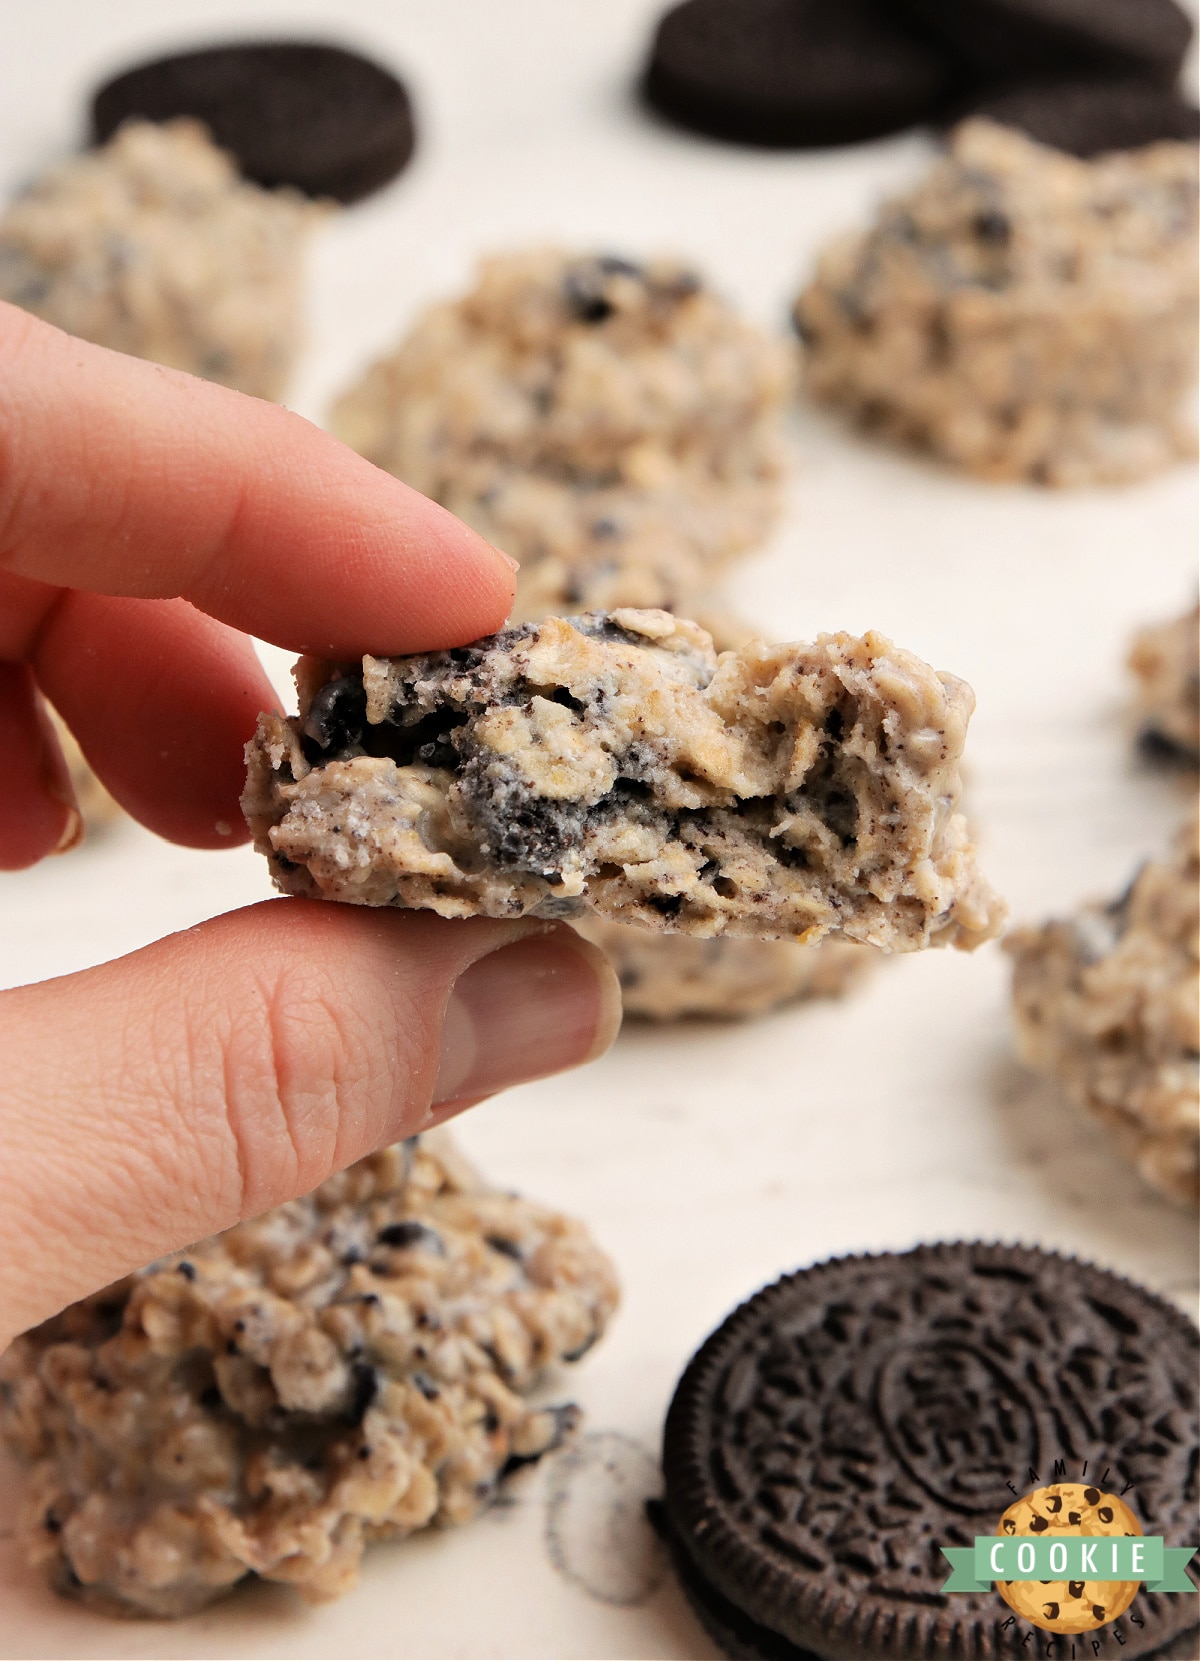 Oreo No Bake Cookies made with oats, Oreos and a few other simple ingredients. Delicious no bake cookie recipe packed with cookies and cream flavor!